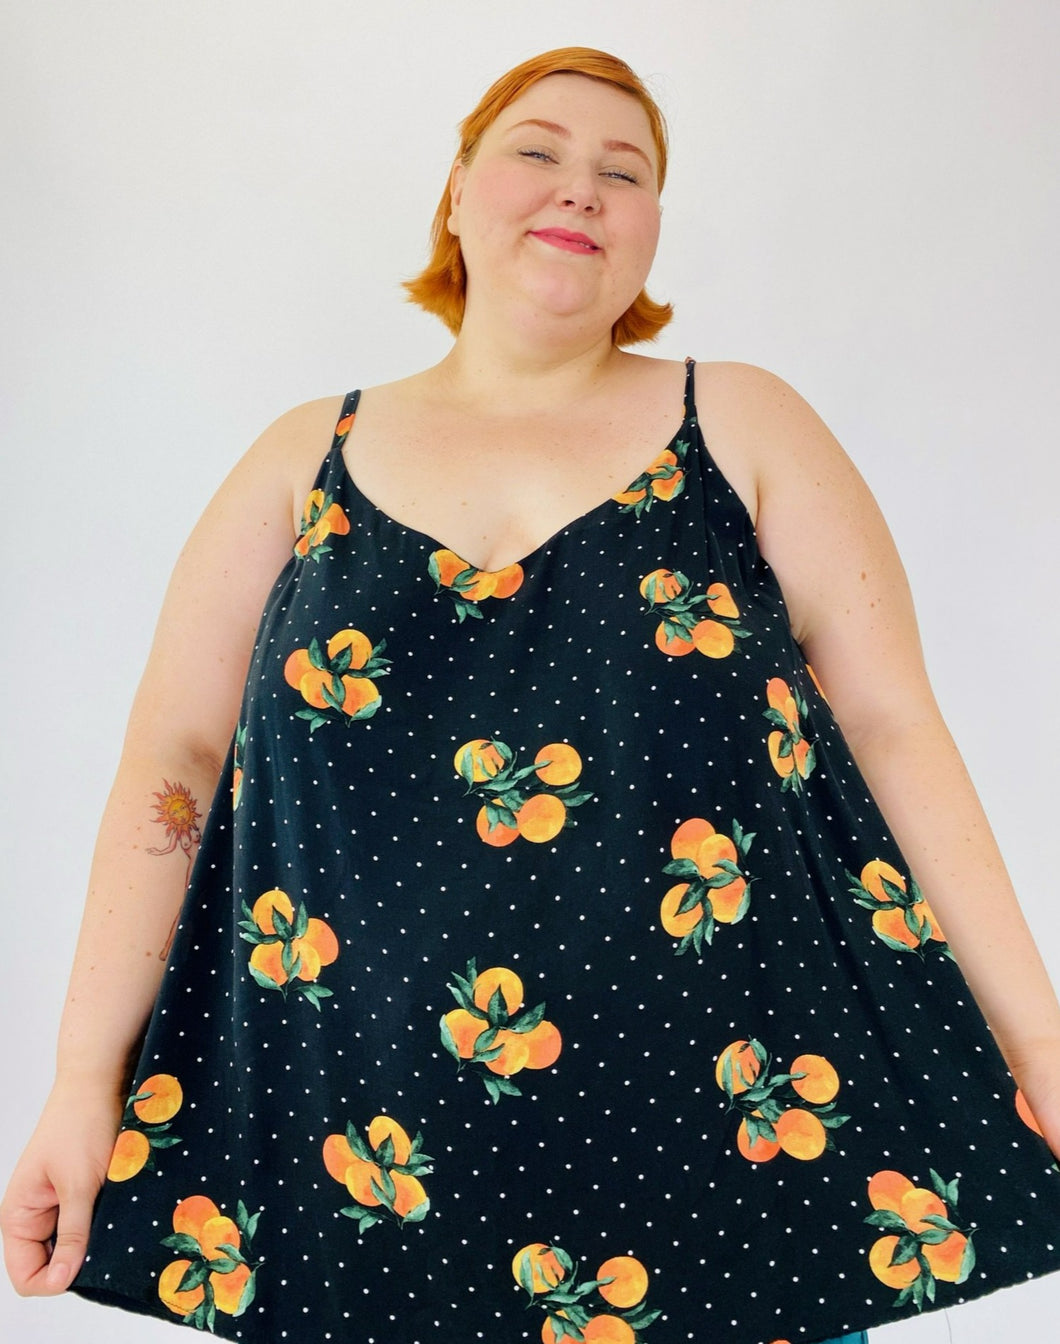 A size 4 Torrid black flowy tank top with an orange pattern and white mini polka dots on a size 22 model. The straps are adjustable.